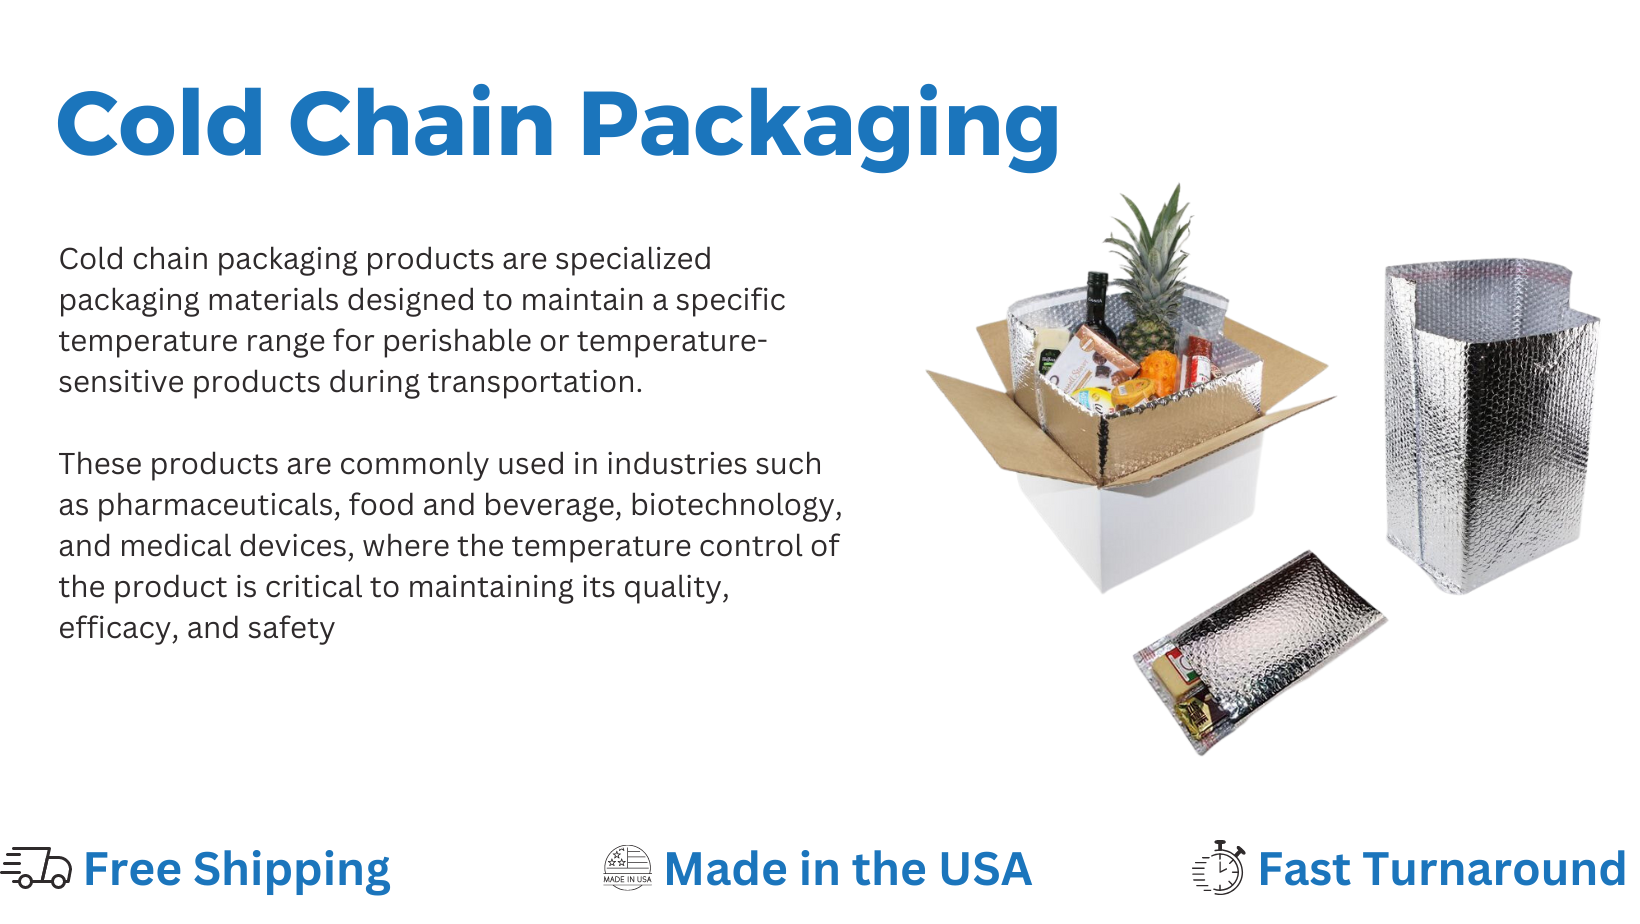 https://zebrapack.com/media/wysiwyg/Cold_Chain_Products.png